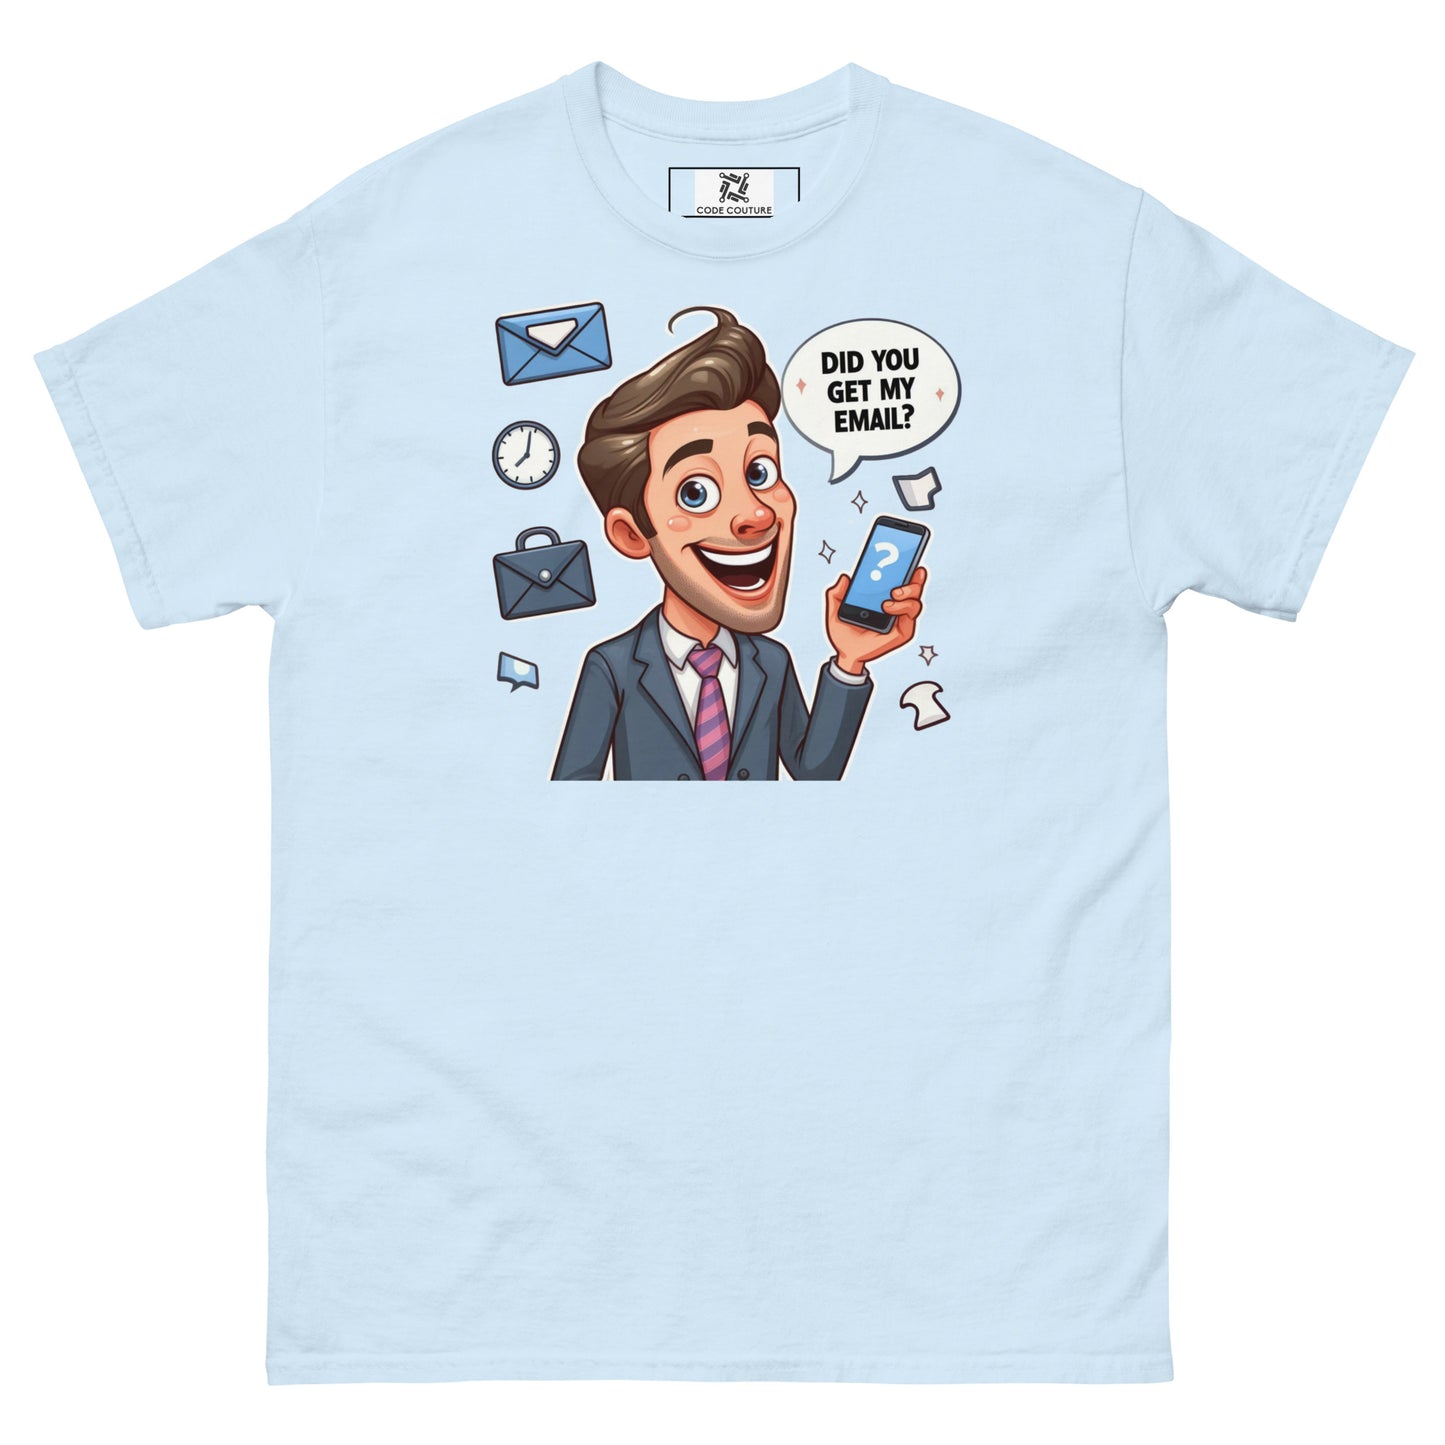 Get My Email tee?